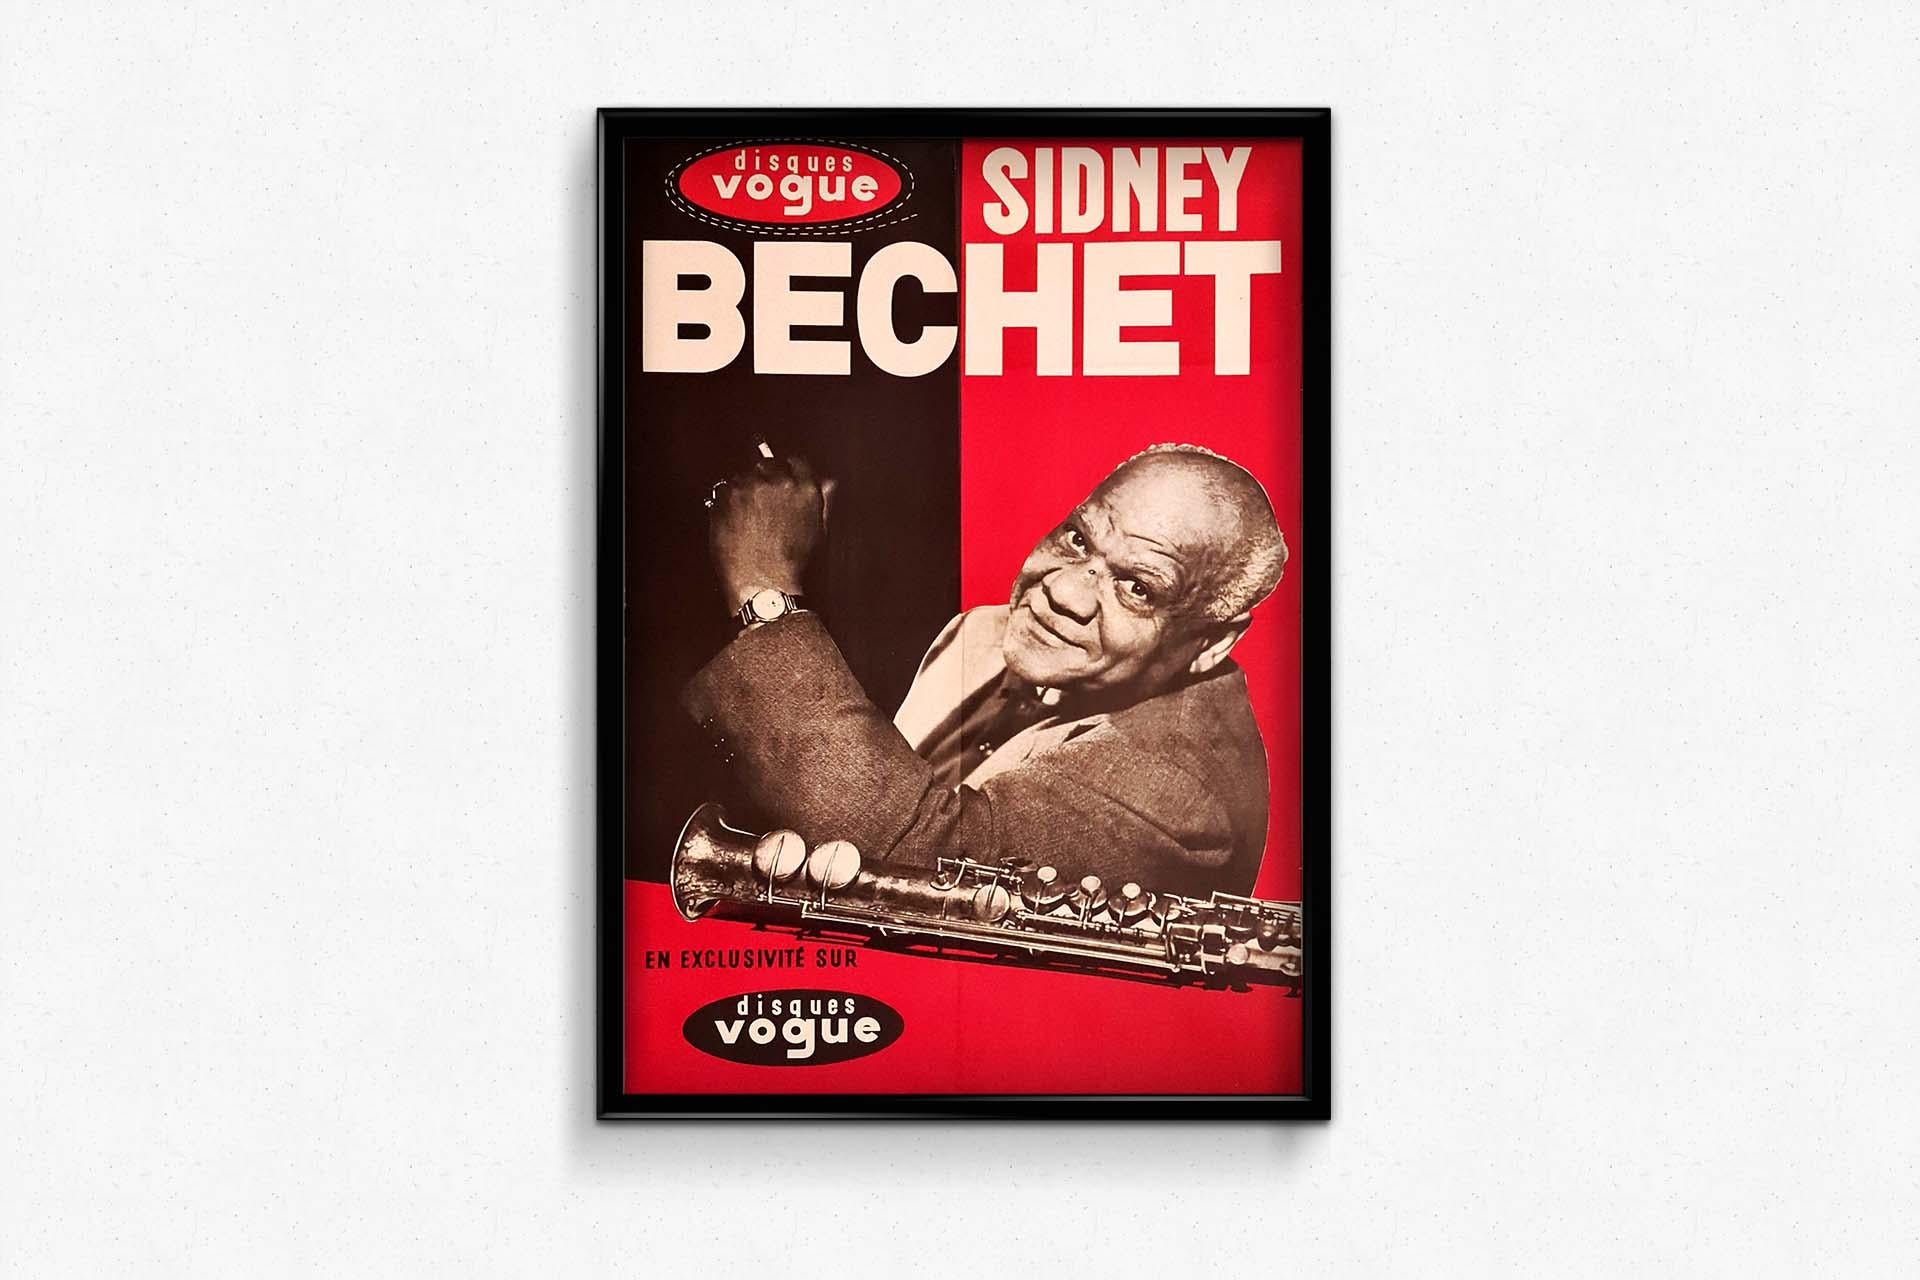 Sidney Bechet 🇺🇸 (1897 - 1959) was an iconic American jazz clarinetist, saxophonist and composer.

Disques Vogue is a French record production and distribution label, established in 1947 and defunct in 1992. The label originally specialized in